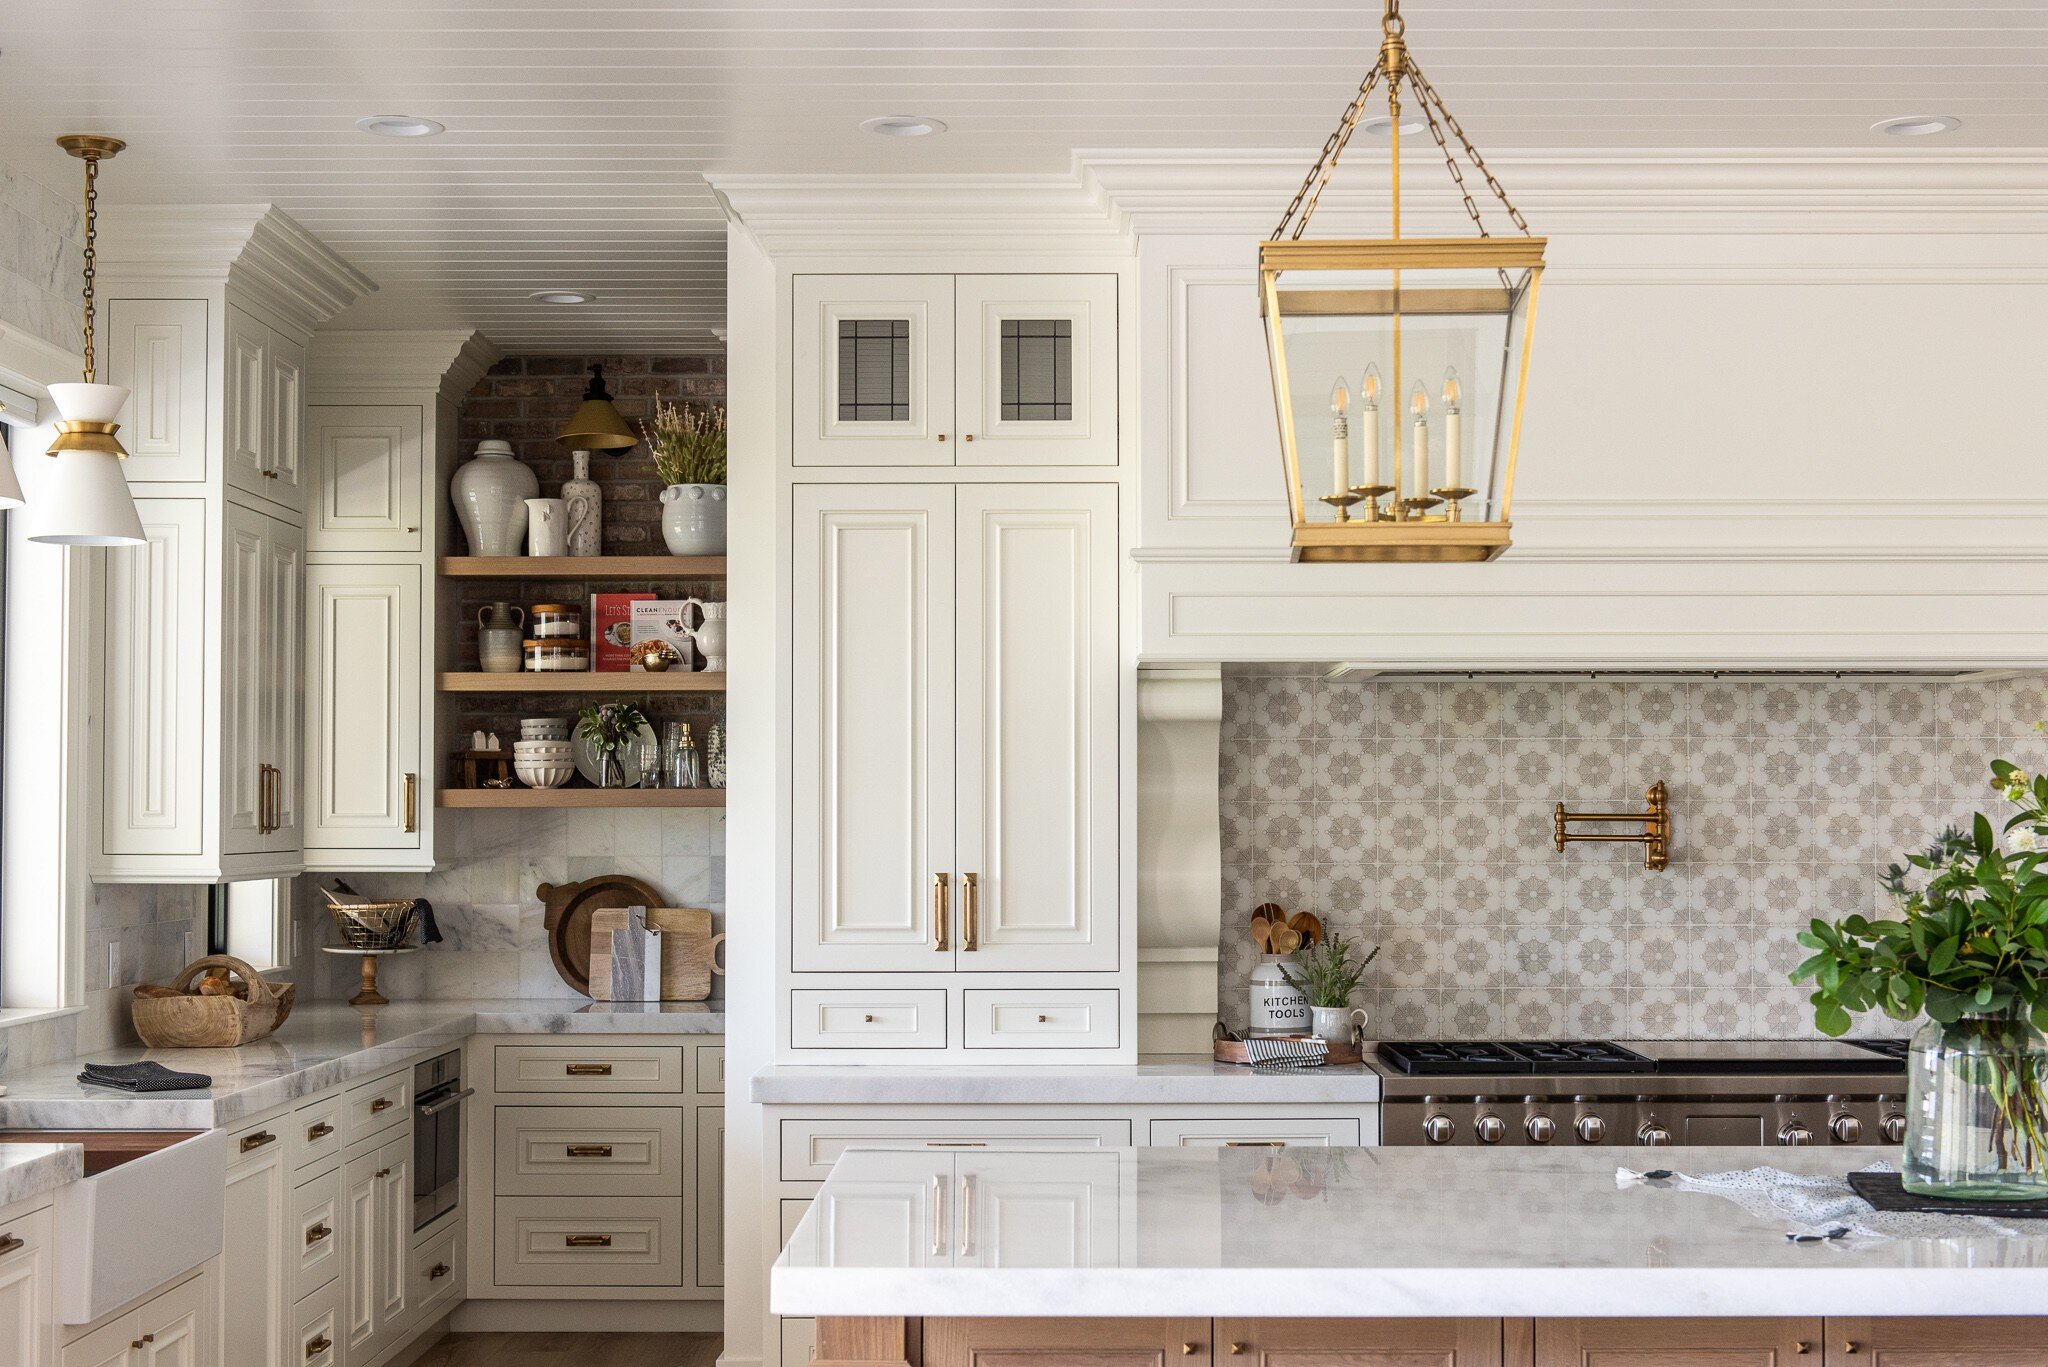 Is White Dove A Good Color For Kitchen, What Wall Color Goes With White Dove Kitchen Cabinets